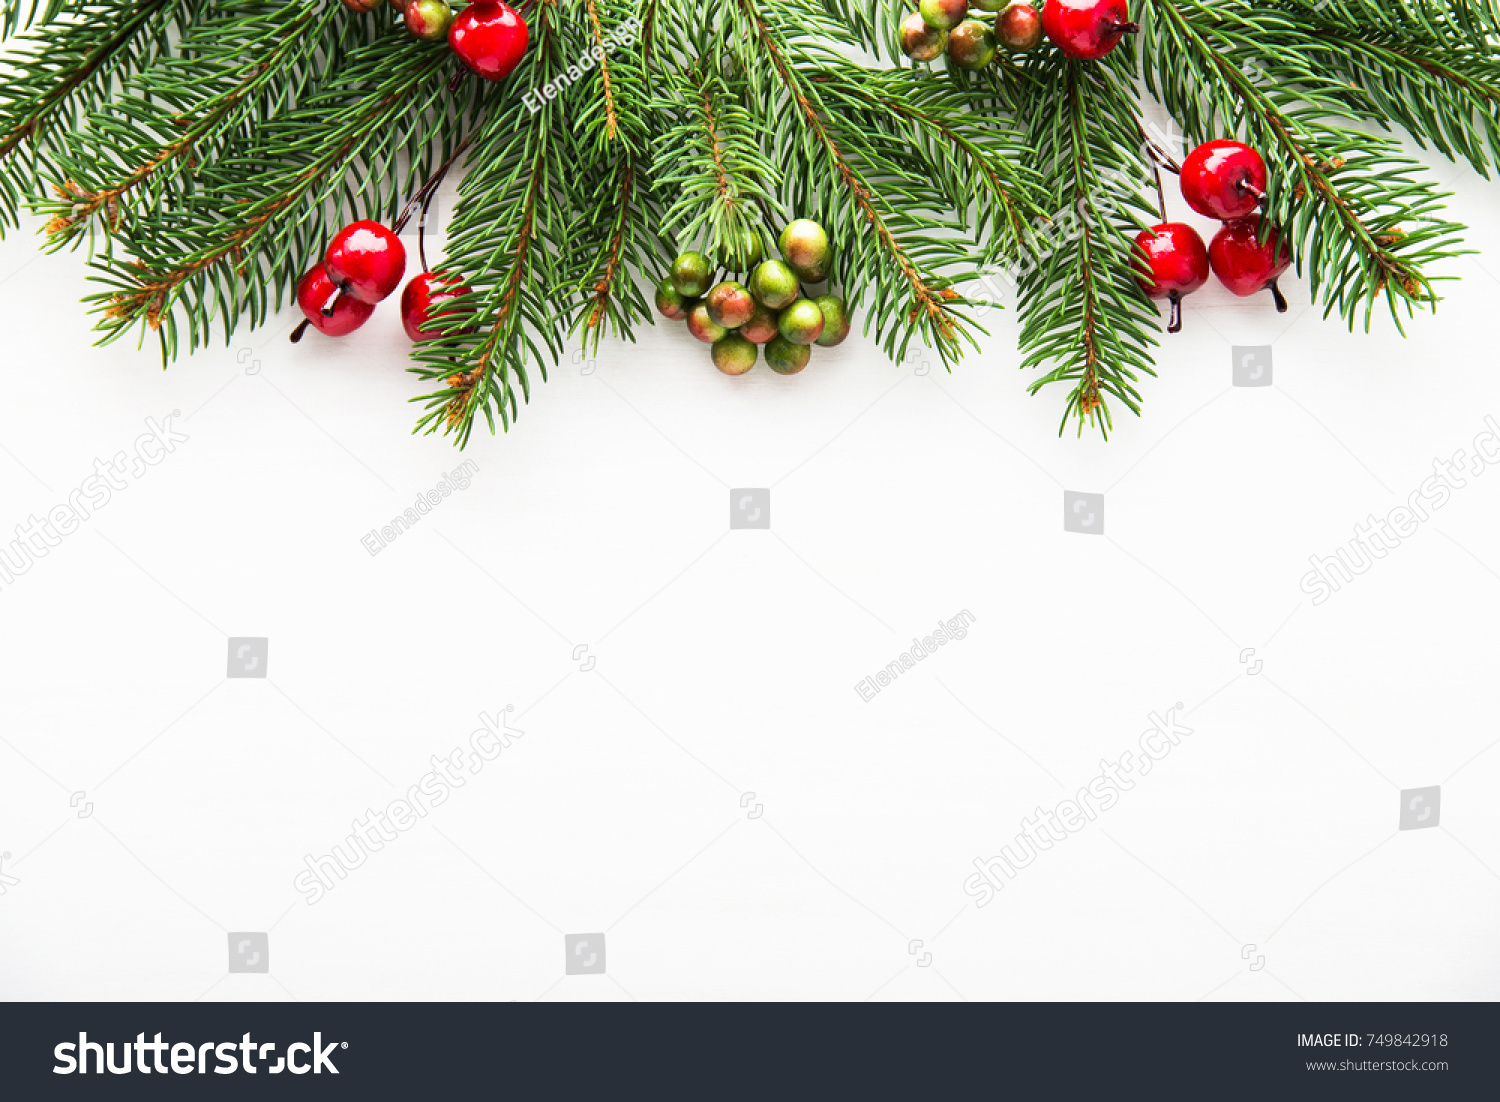 Christmas background with xmas tree and red berries on white wooden background. Merry christmas greeting card, frame, banner. Winter holiday theme. Happy New Year. Space for text. #749842918